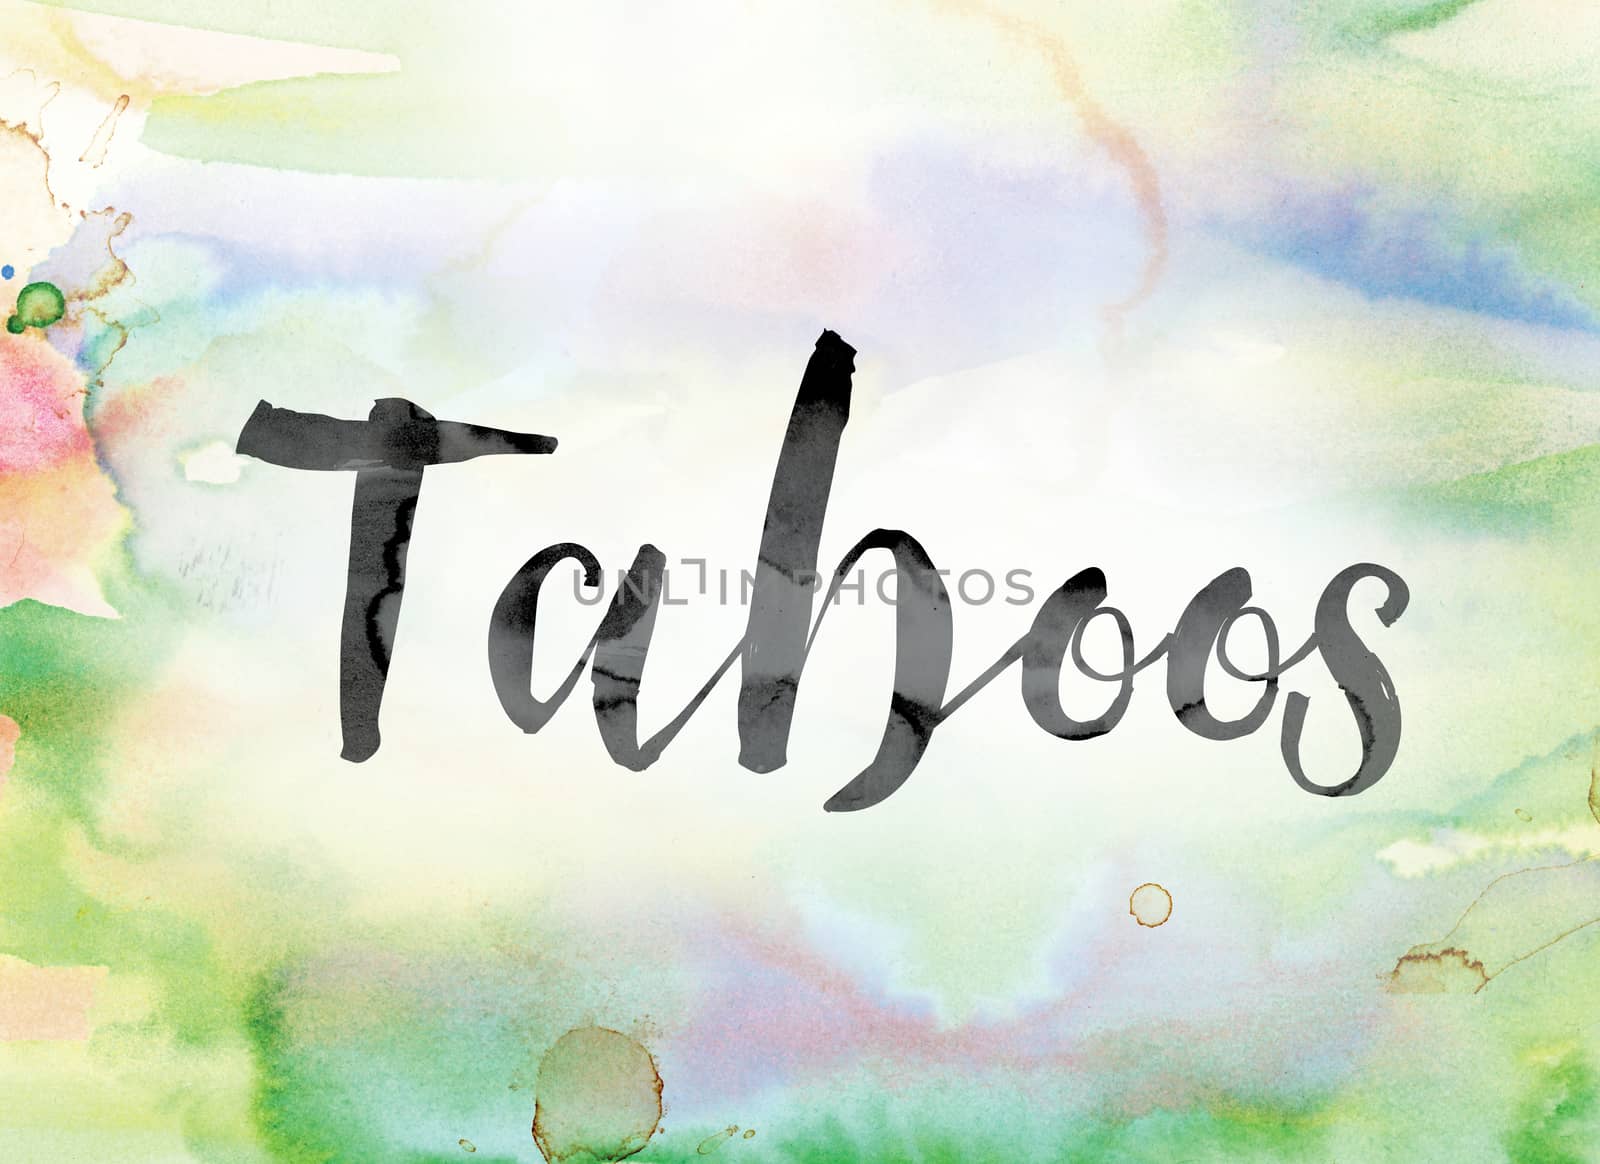 Taboos Colorful Watercolor and Ink Word Art by enterlinedesign